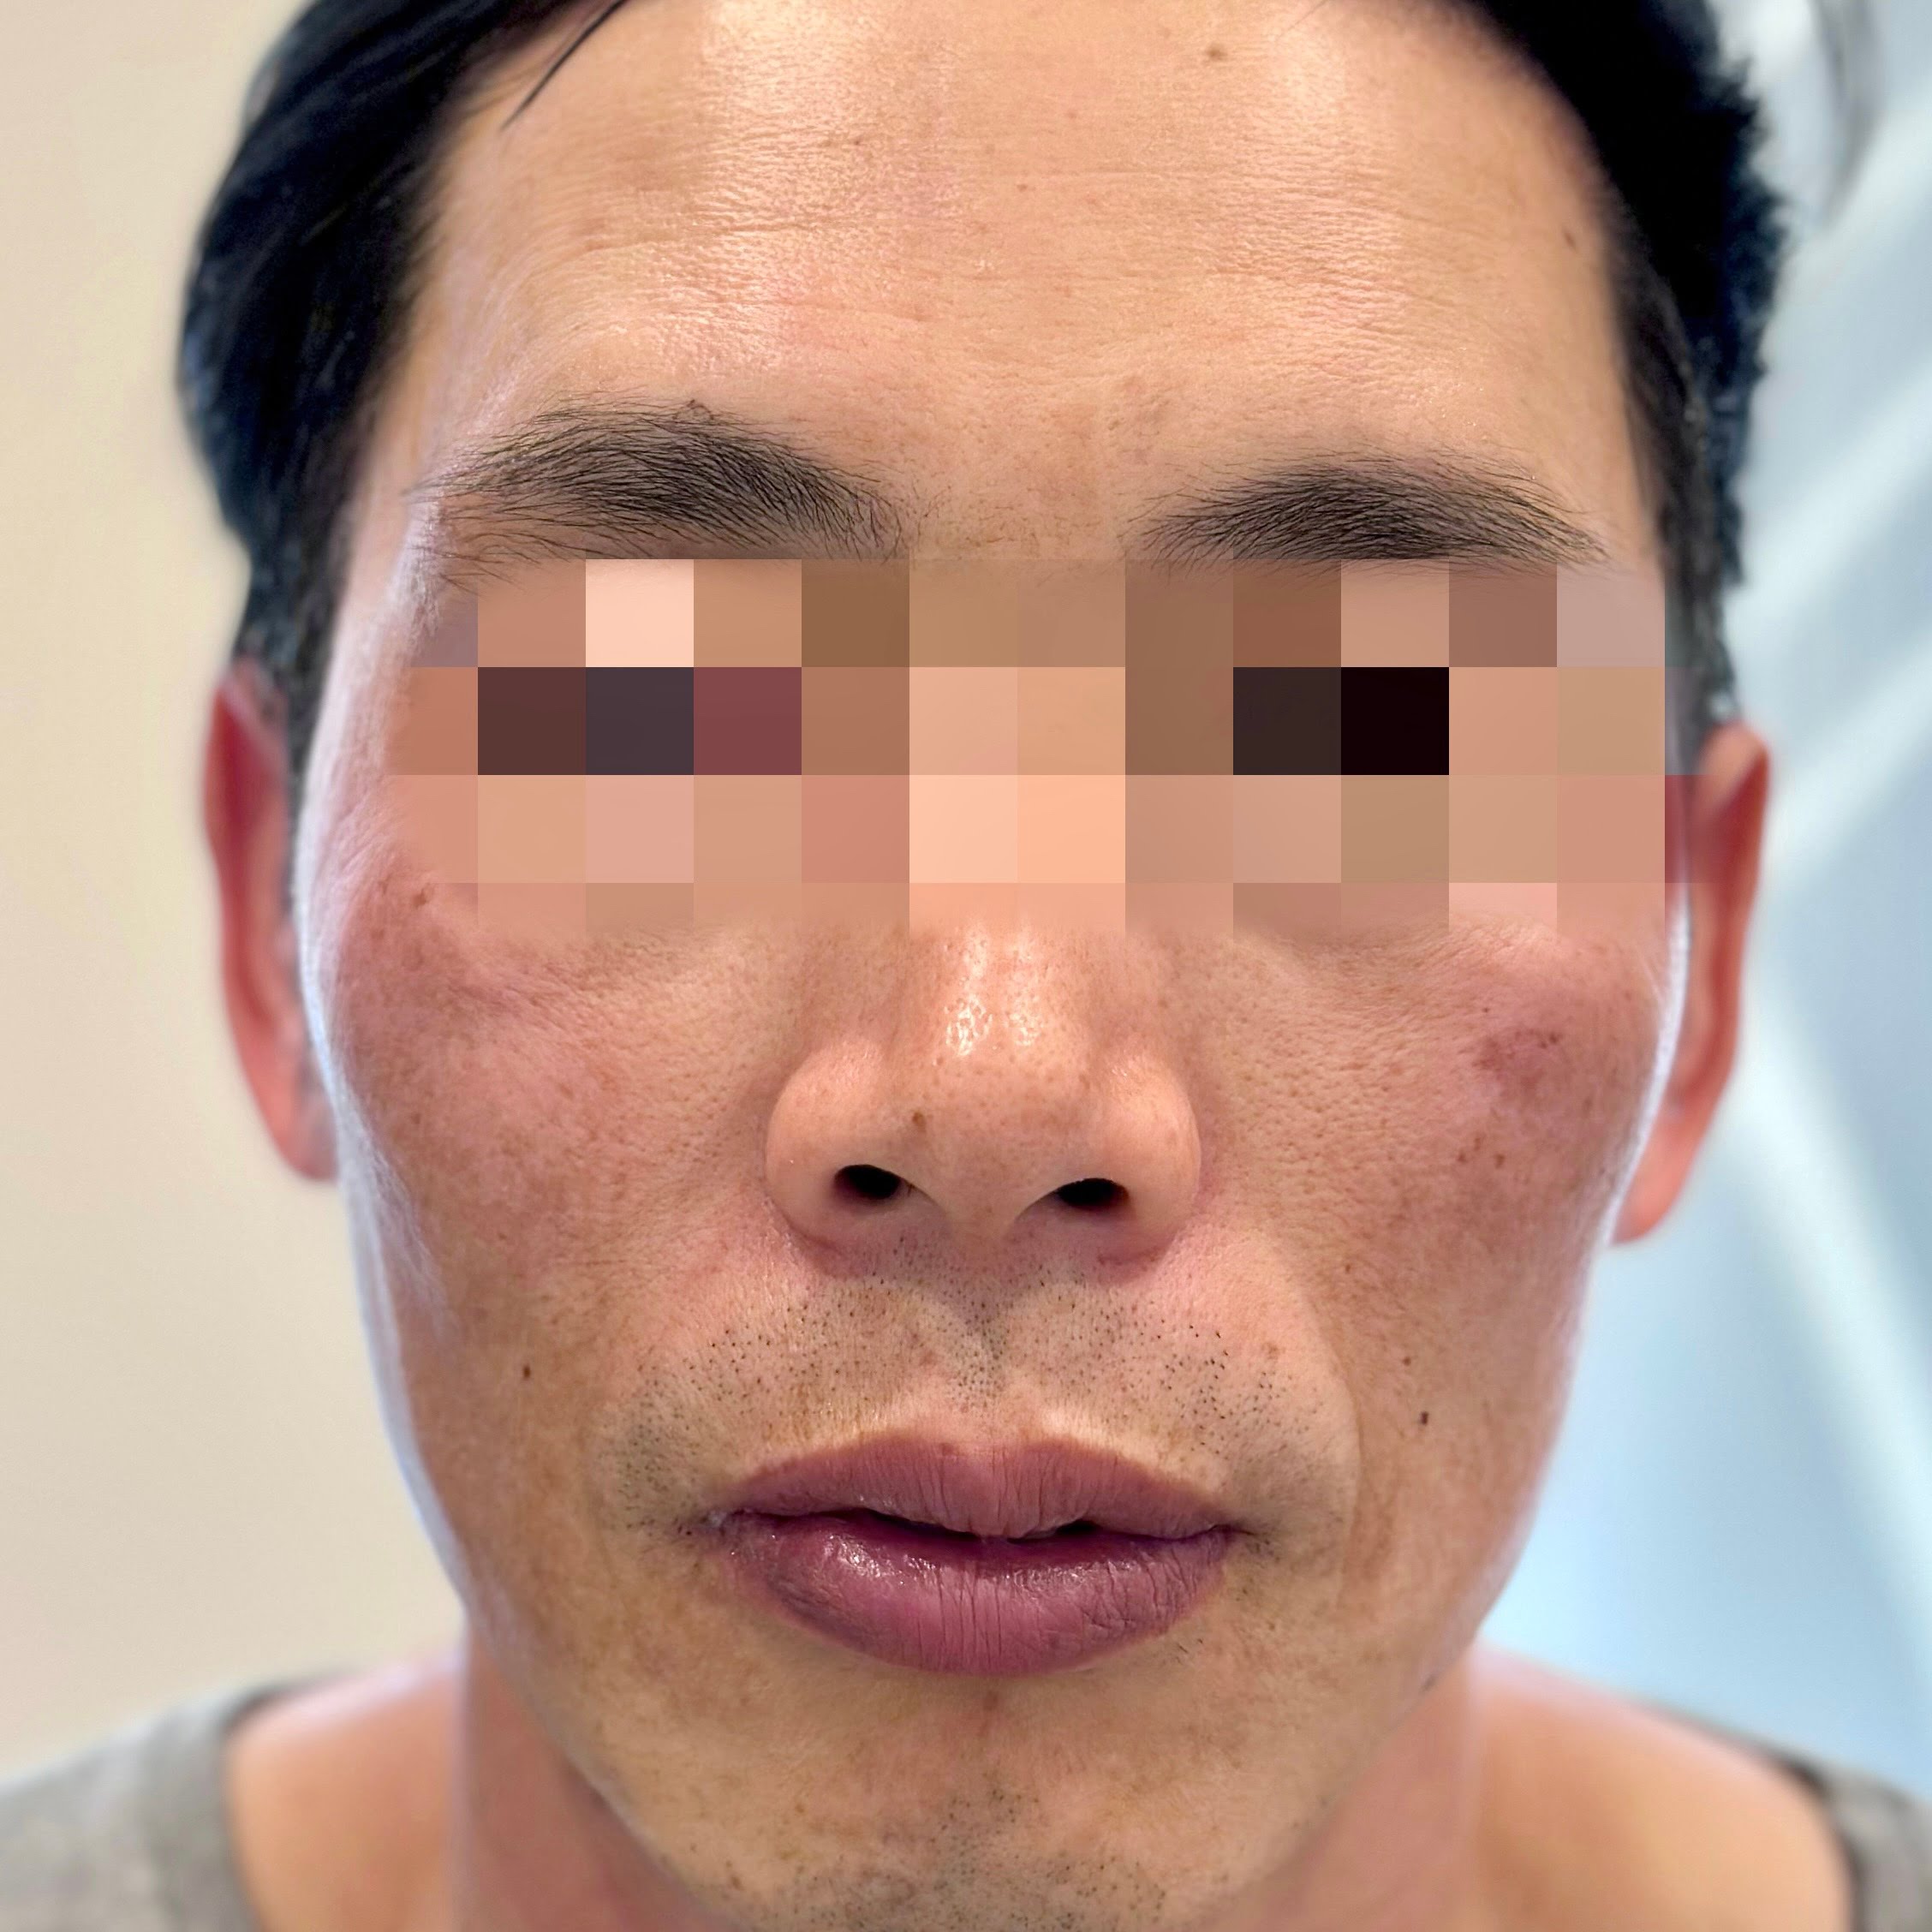 Instantly after one Thermage FLX skin tightening treatment